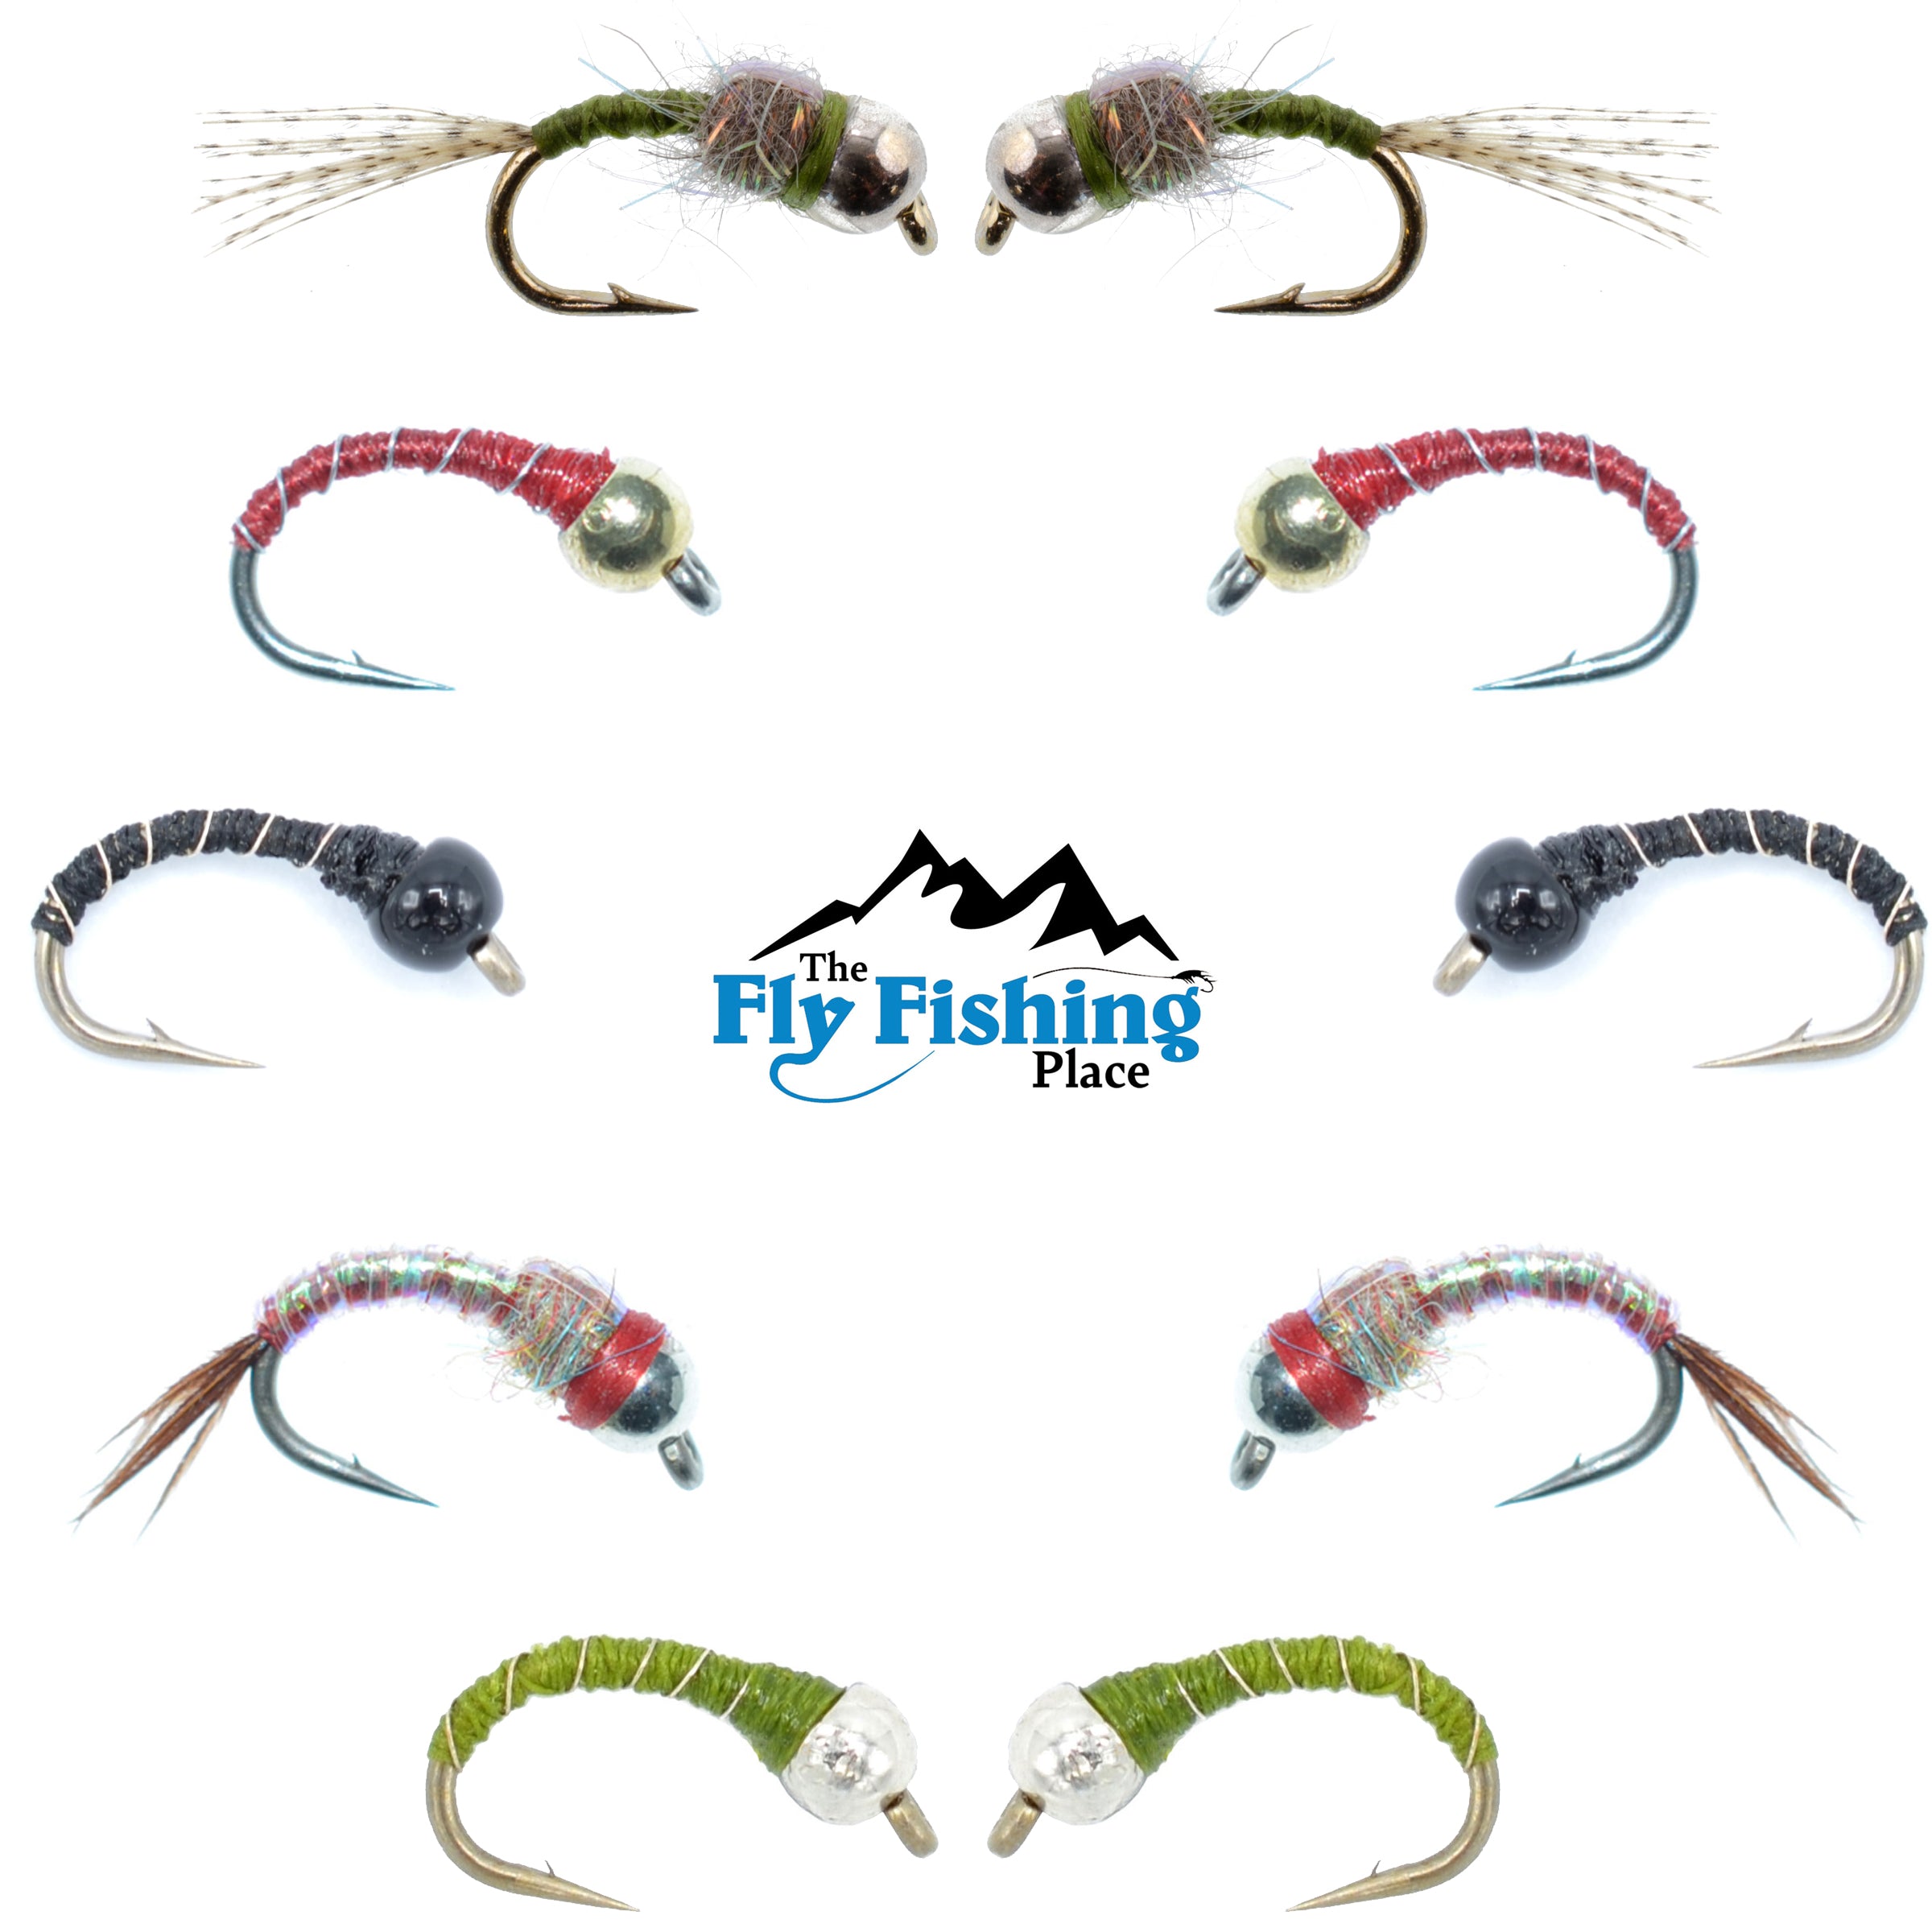 hopper type trout fishing flies are a must for any serious fly fisher.